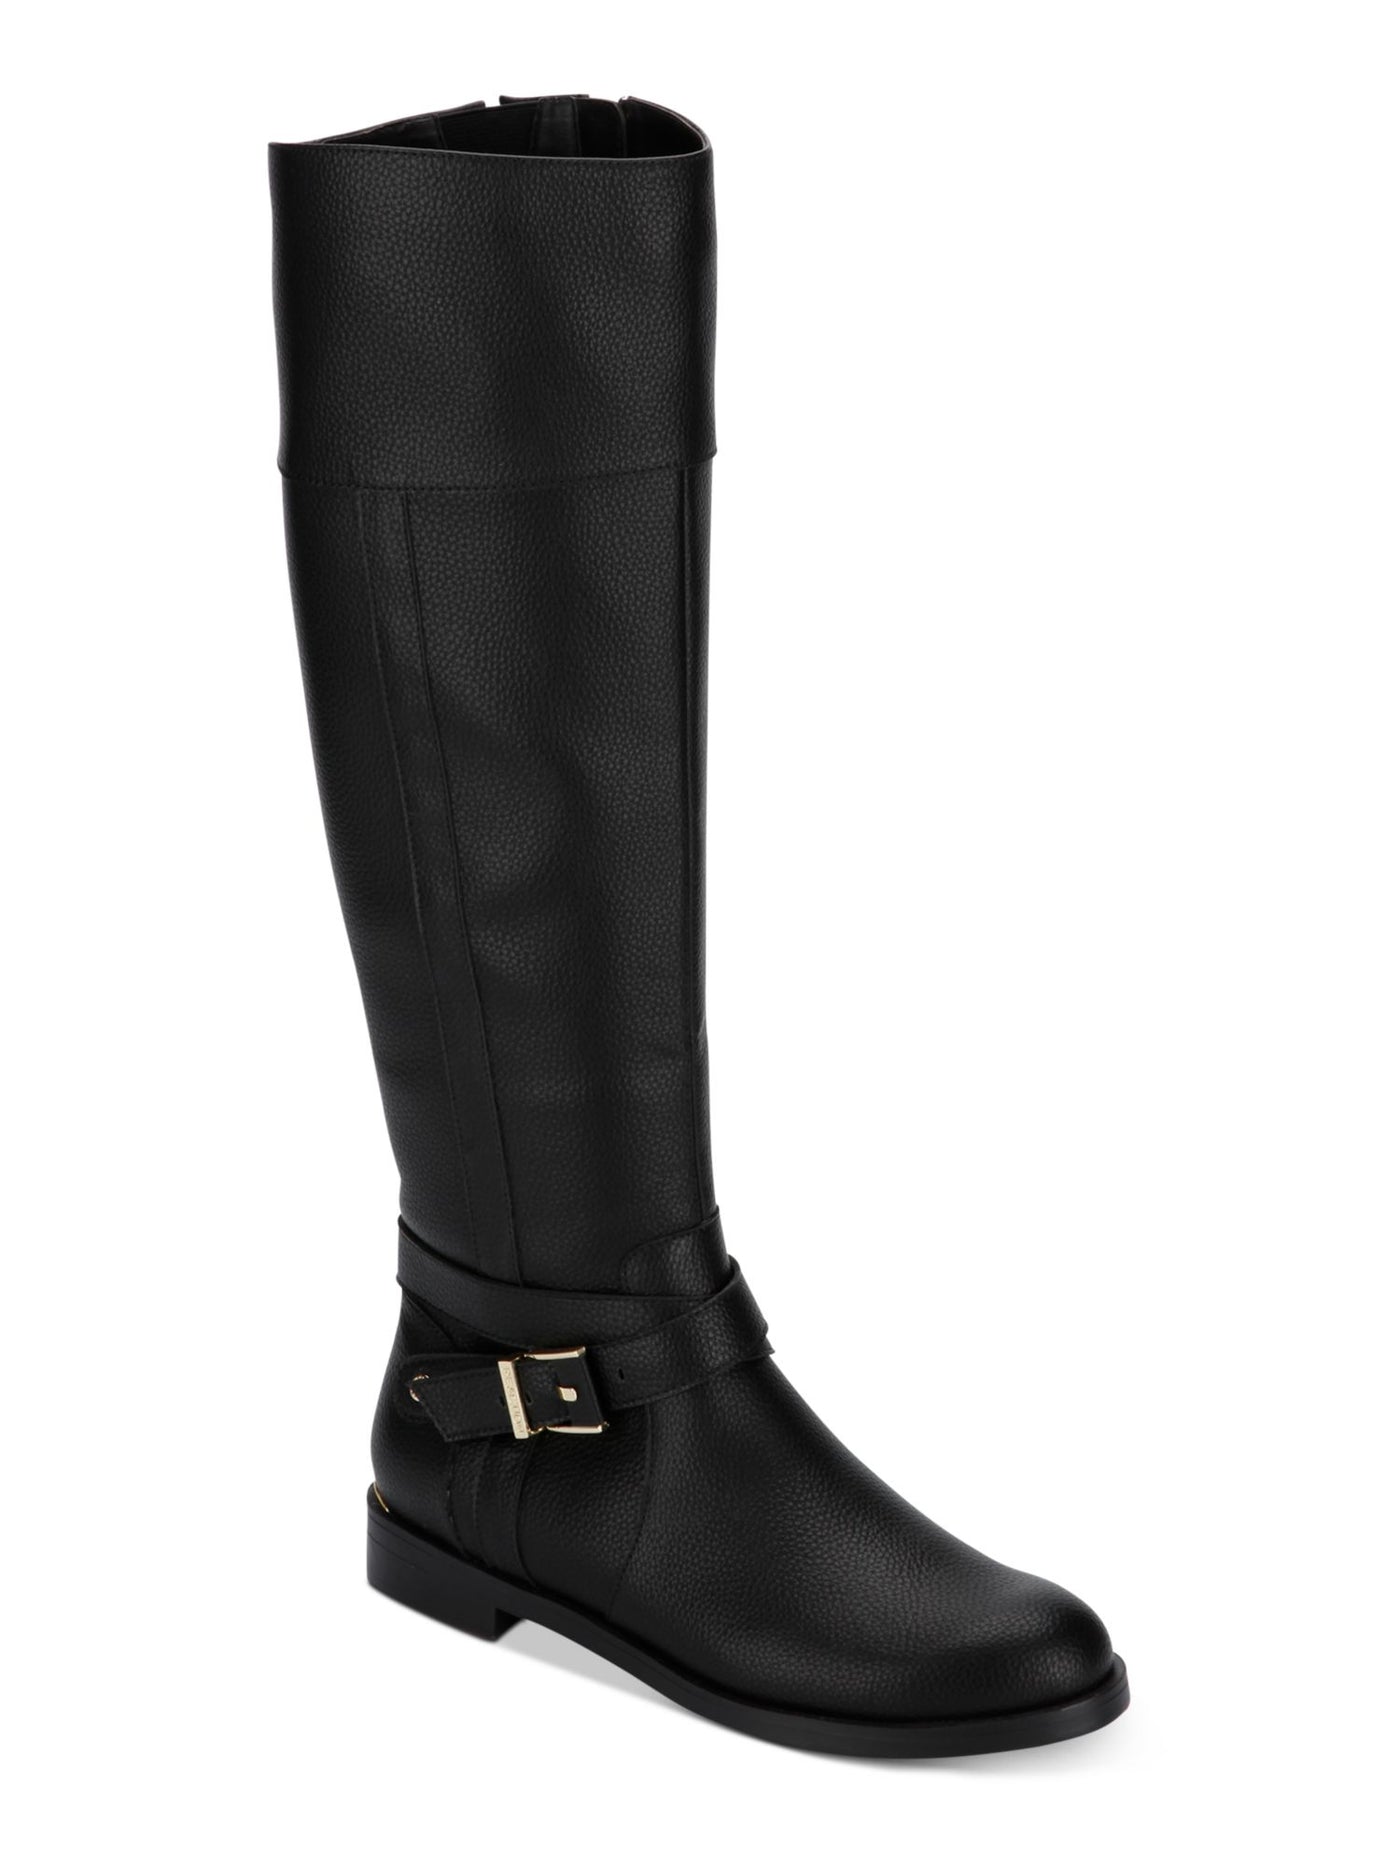 KENNETH COLE Womens Black Gold-Tone Buckle And Heal Accent Buckle Accent Wind Almond Toe Zip-Up Riding Boot 5.5